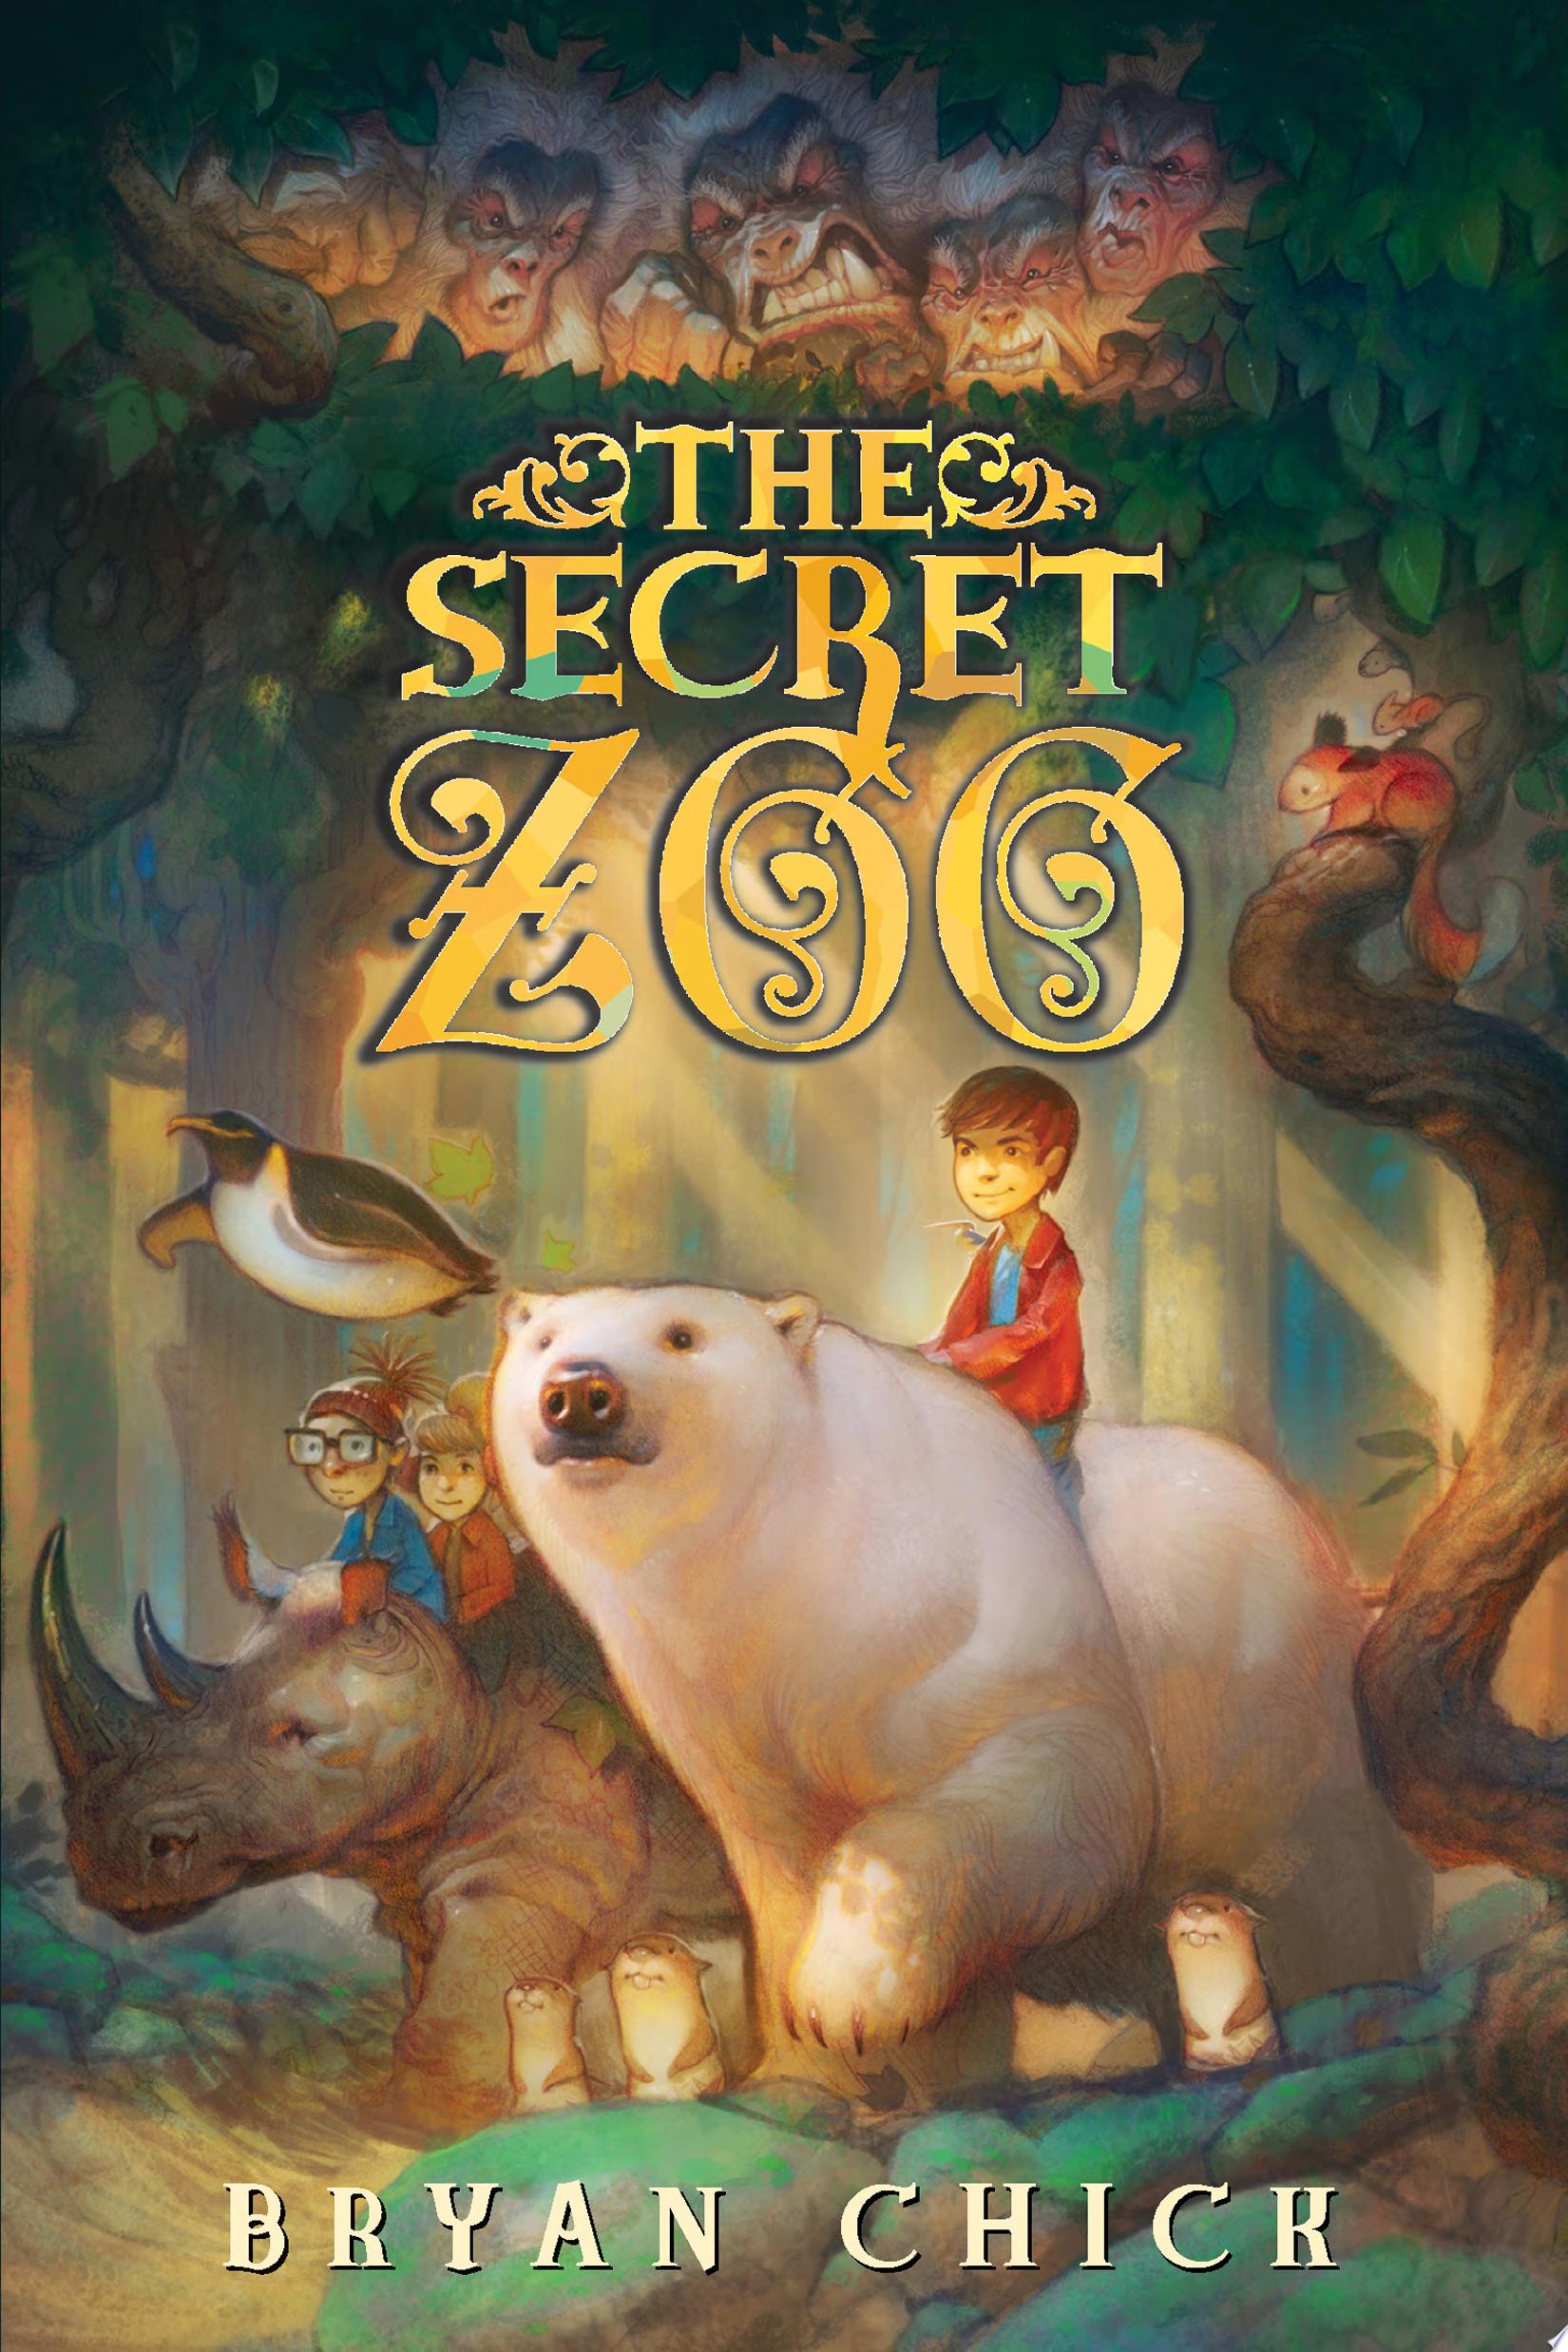 Image for "The Secret Zoo"